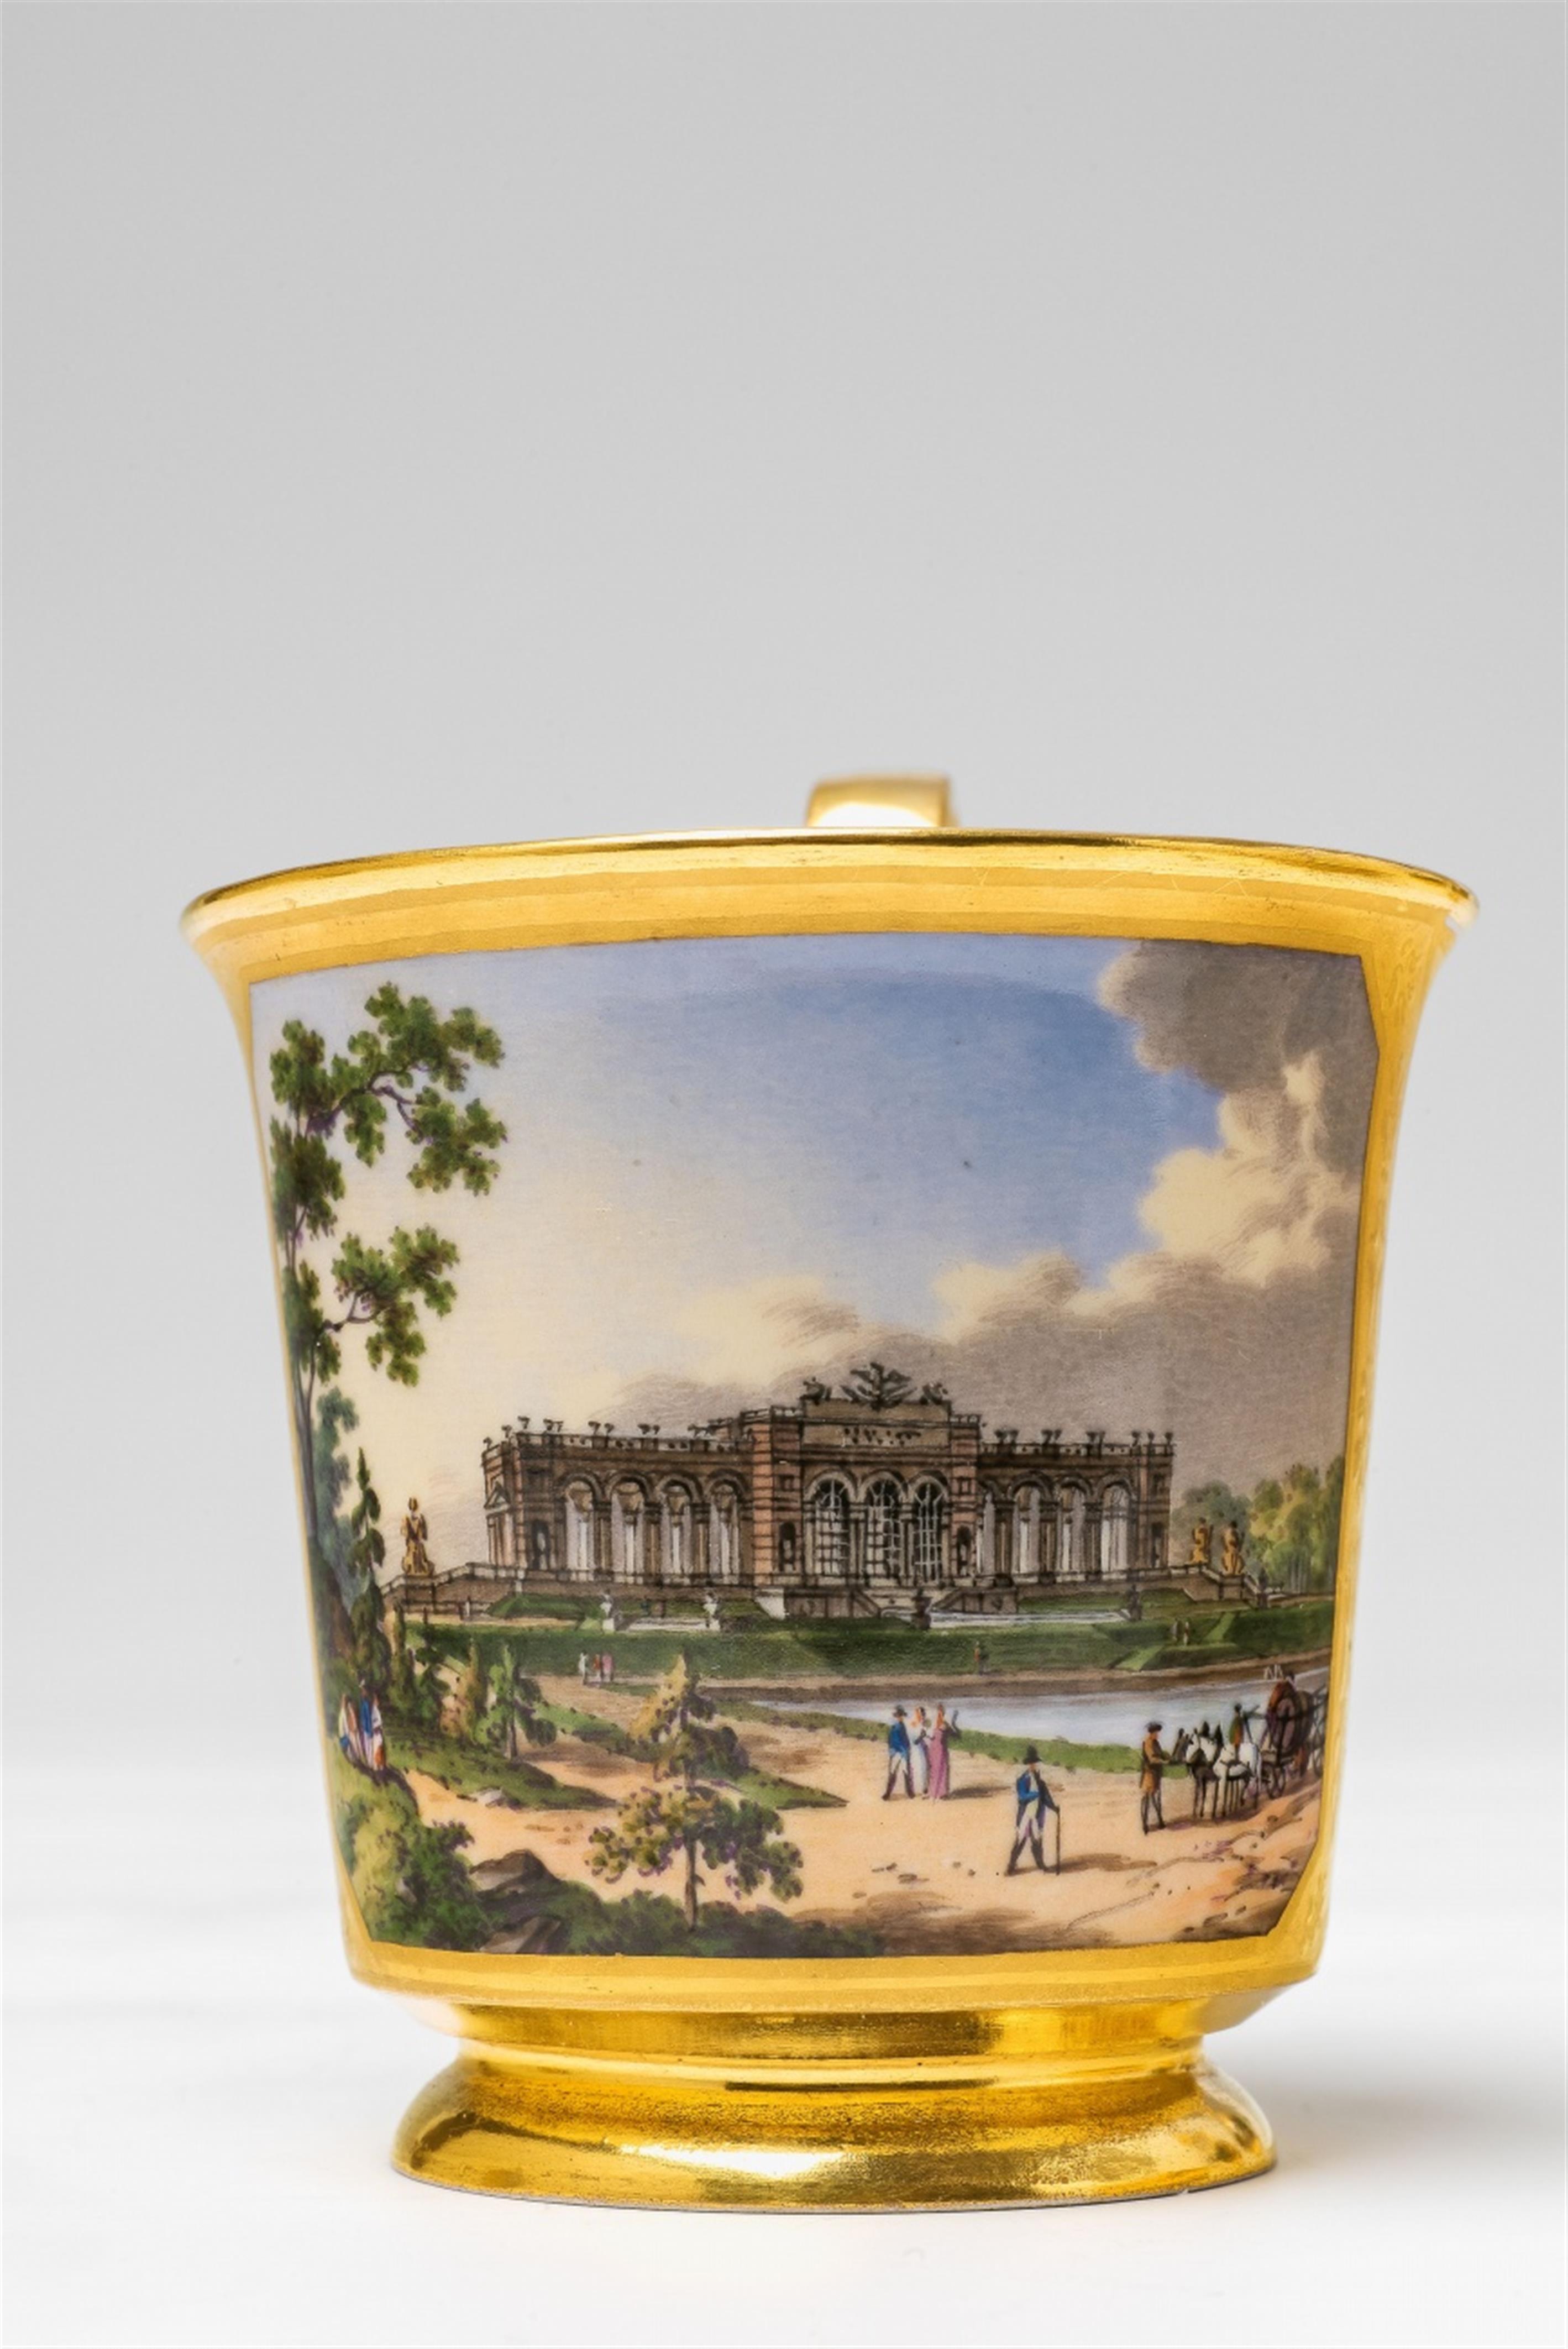 A Niedermayer porcelain déjeuner with views of imperial palaces in Vienna - image-4